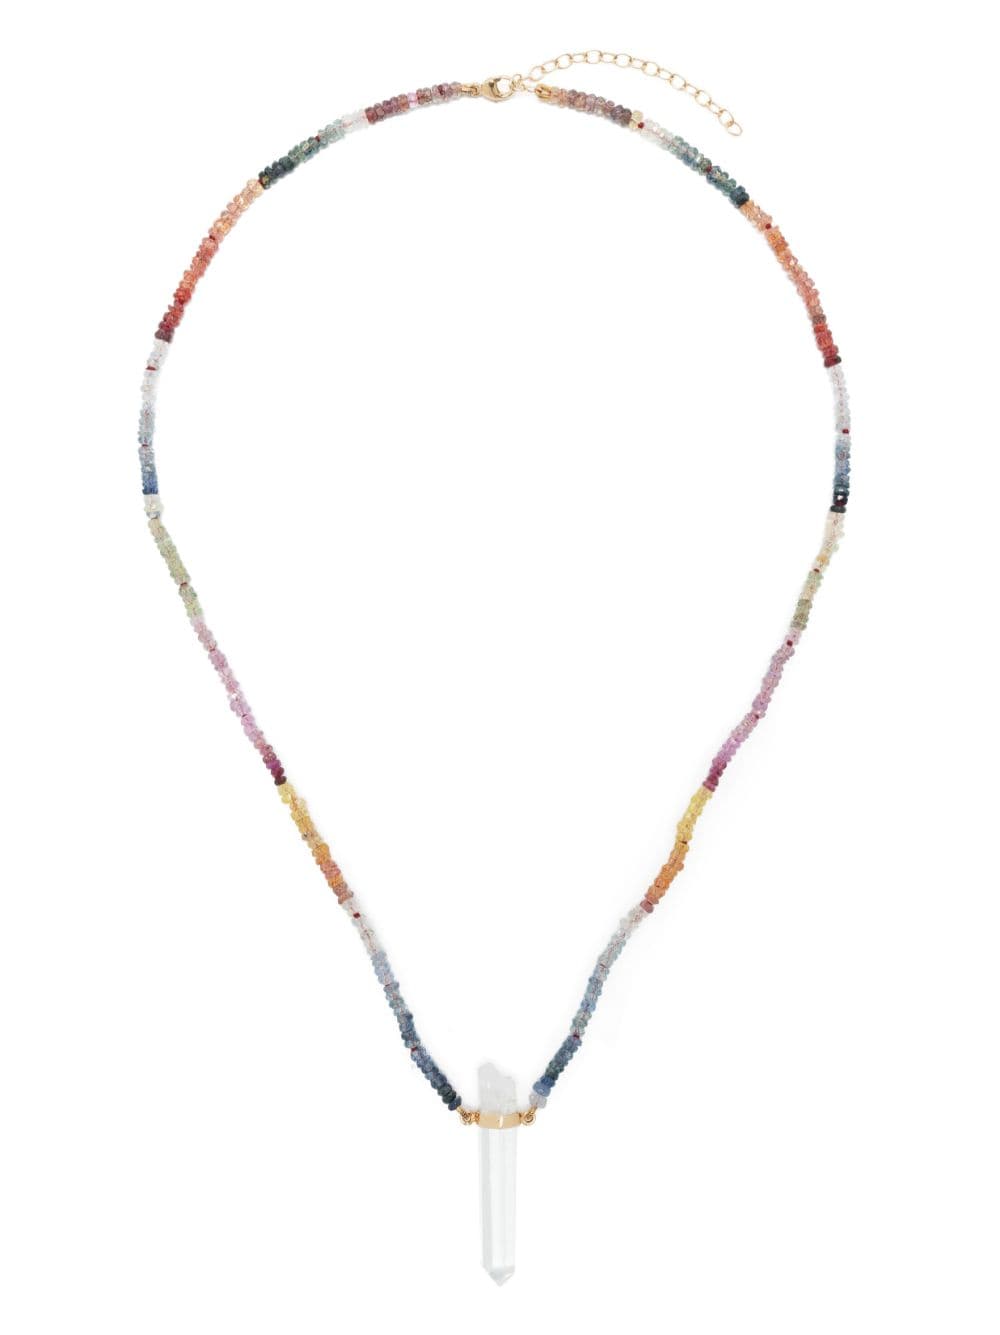 JIA JIA 14kt yellow gold Arizona sapphire and crystal necklace von JIA JIA